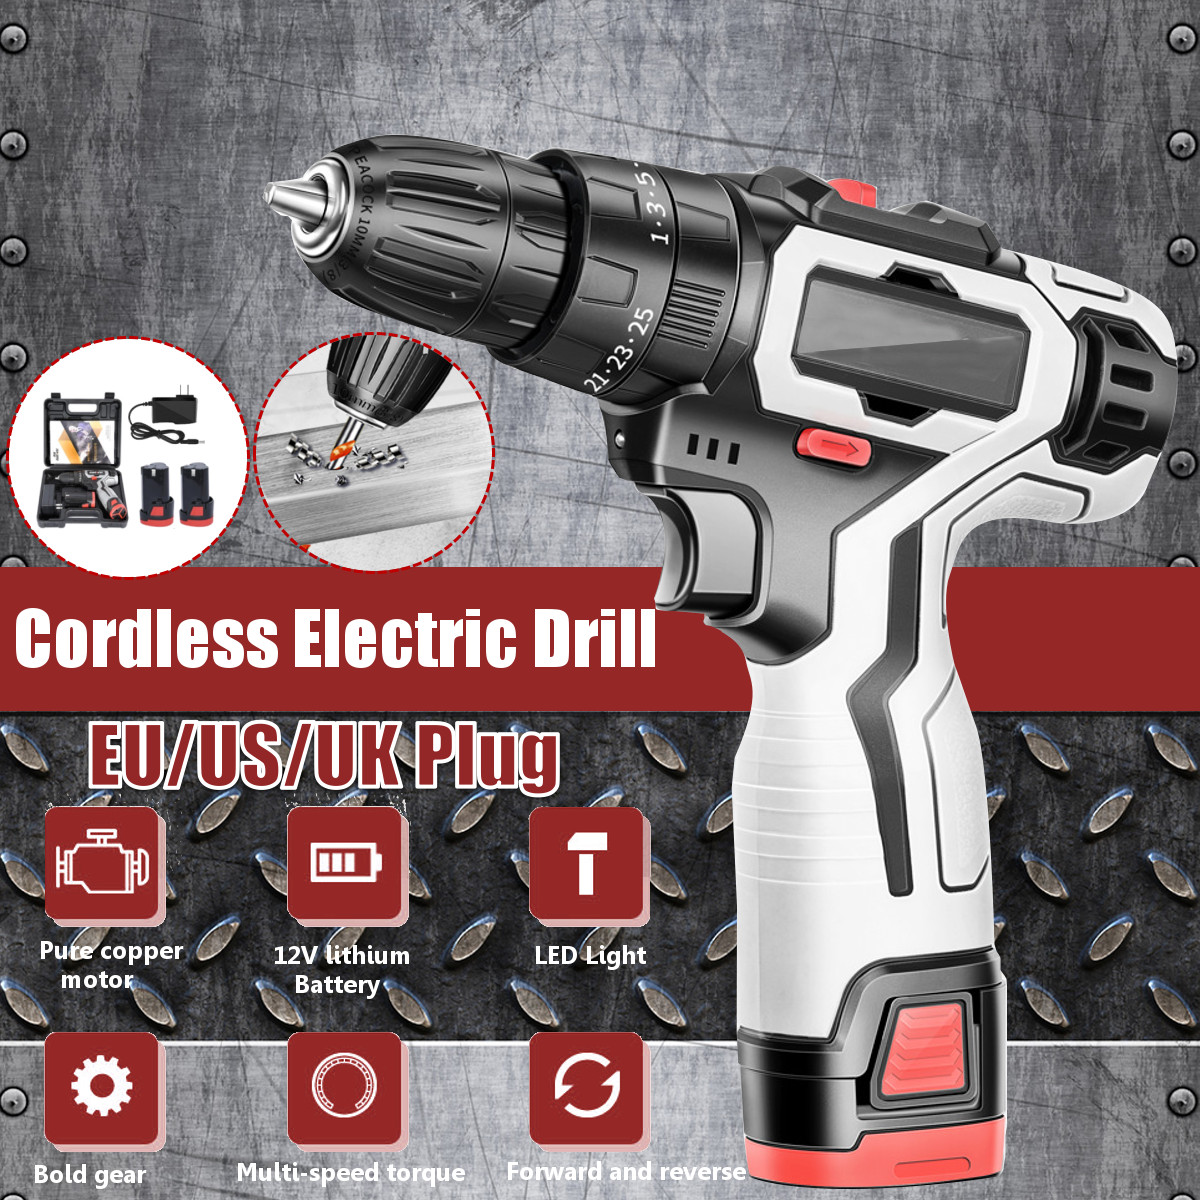 12V-1500mAH-25NM-Rechargeable-Cordless-Drill-2-Speeds-Electric-Screwdriver-Power-Tool-1736770-1